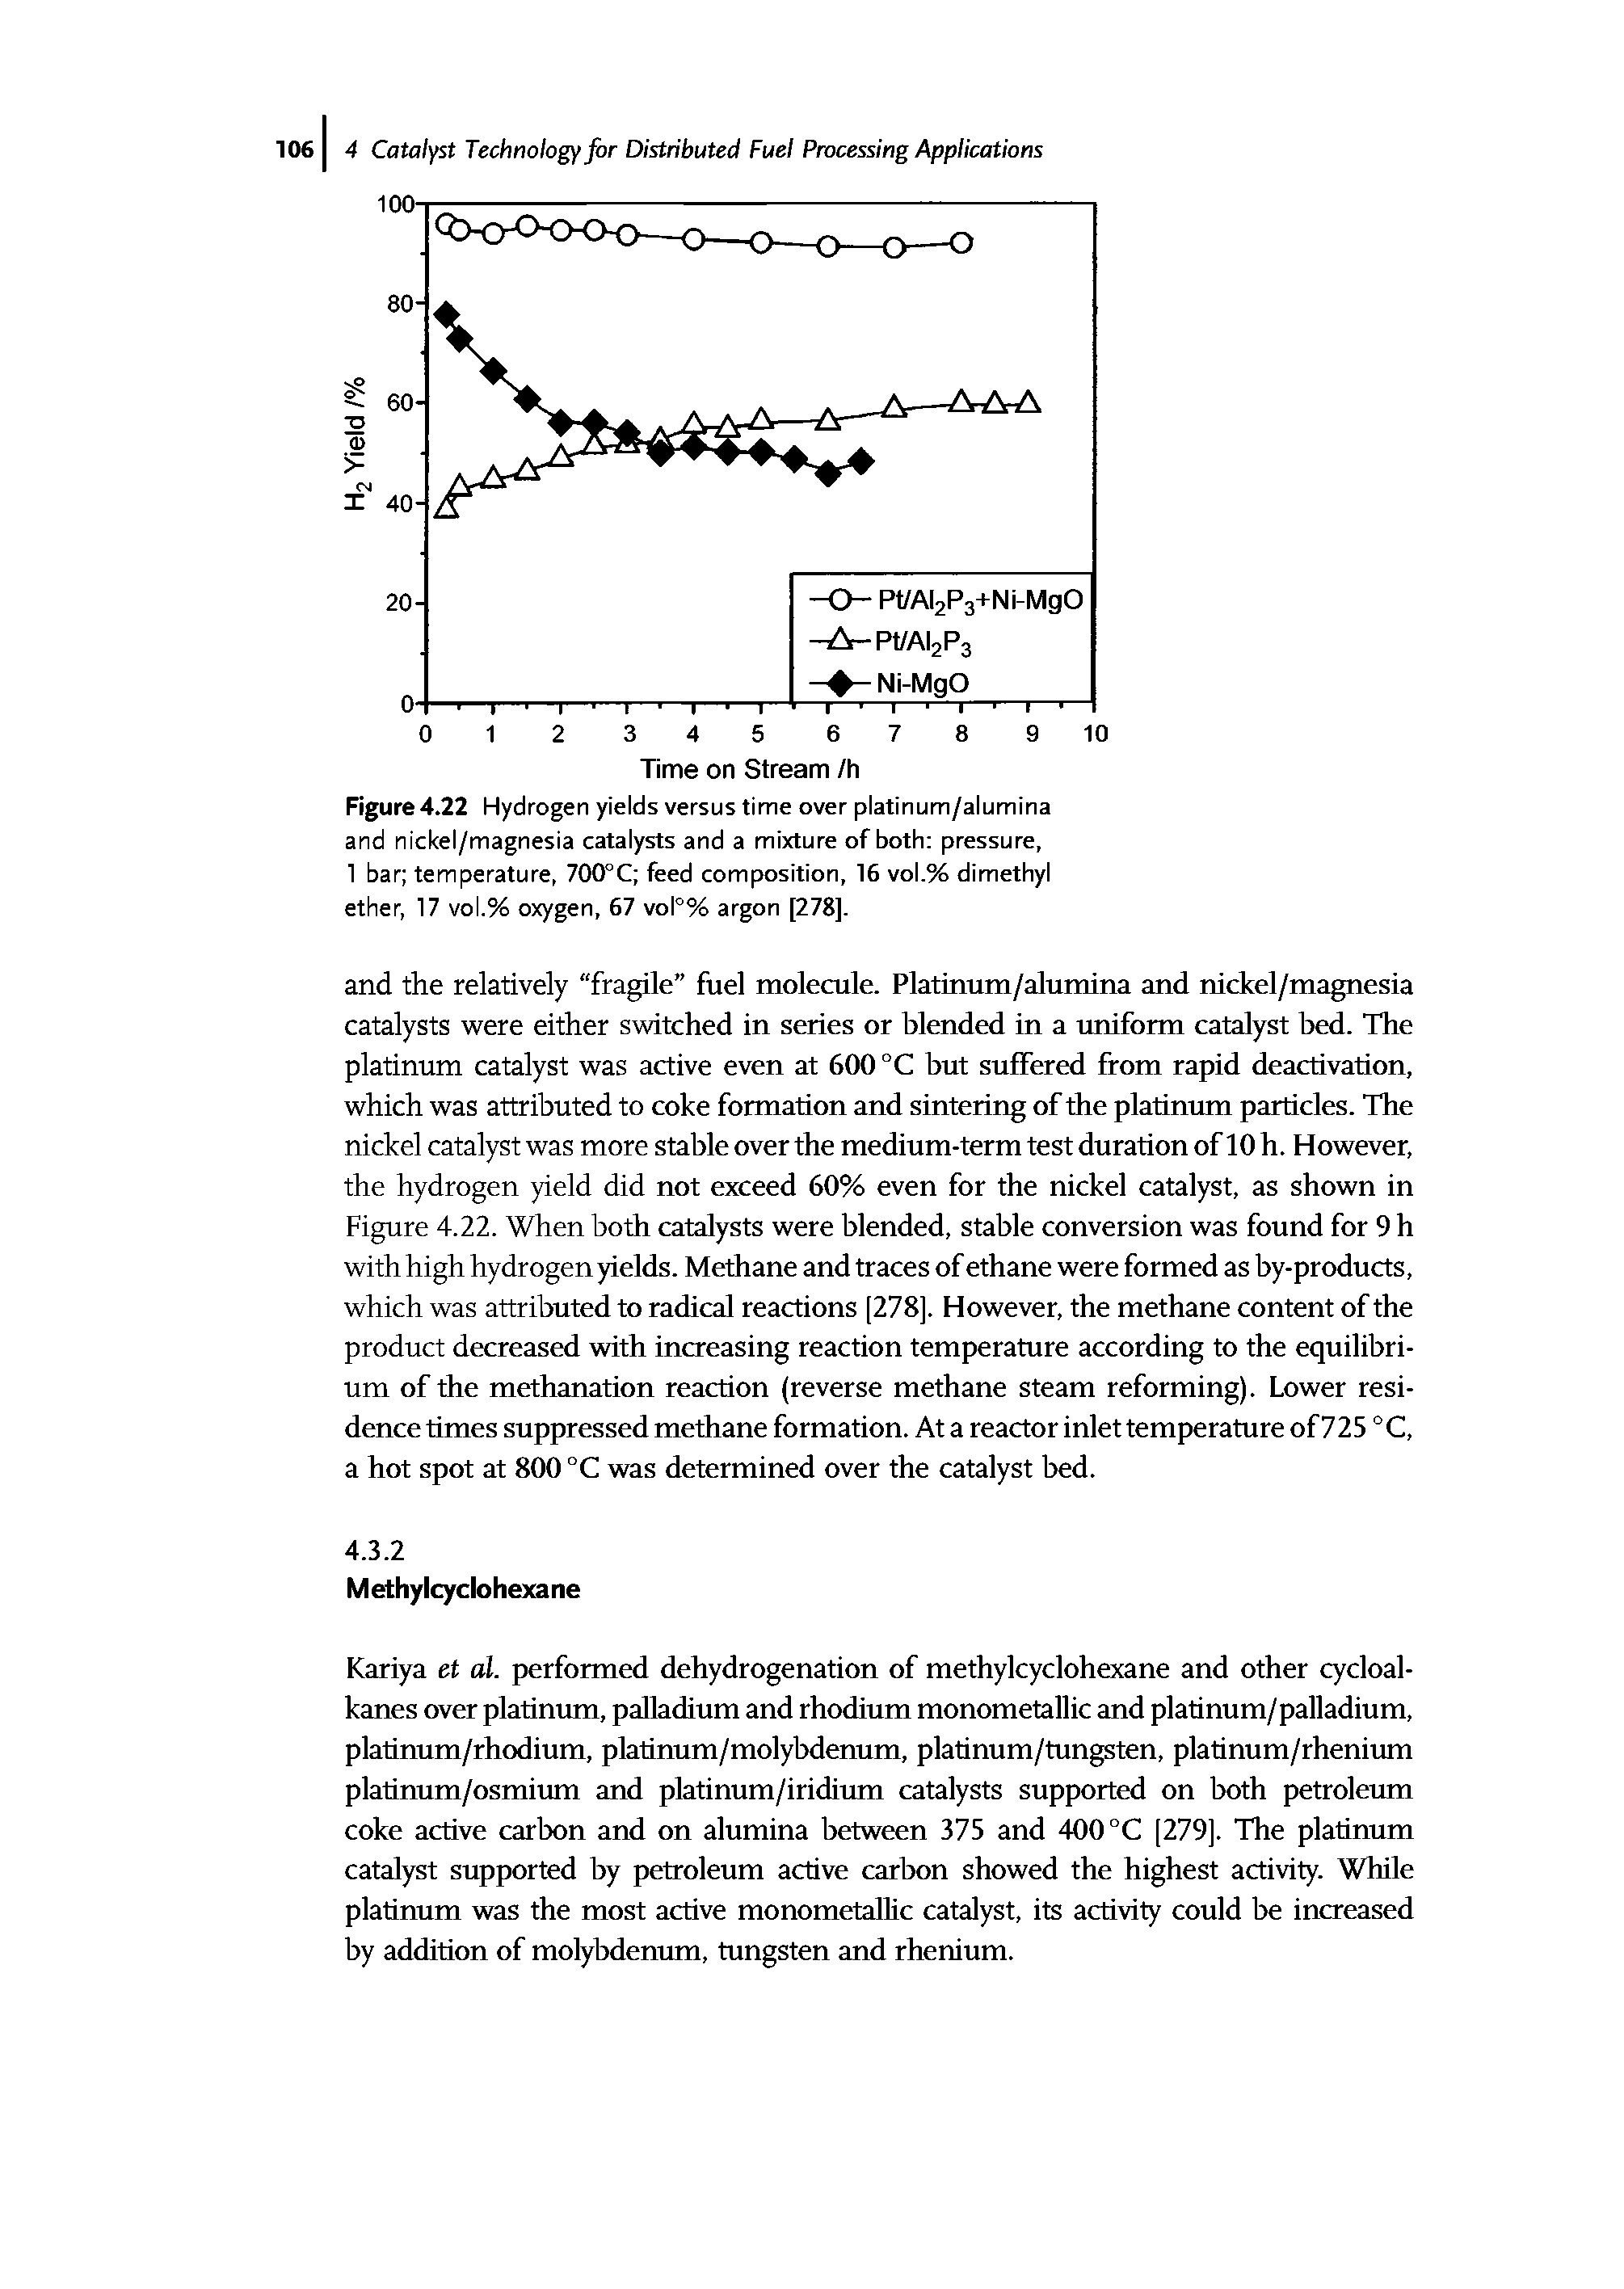 Figure 4.22 Hydrogen yields versus time over platinum/alumina and nickel/magnesia catalysts and a mixture of both pressure,...